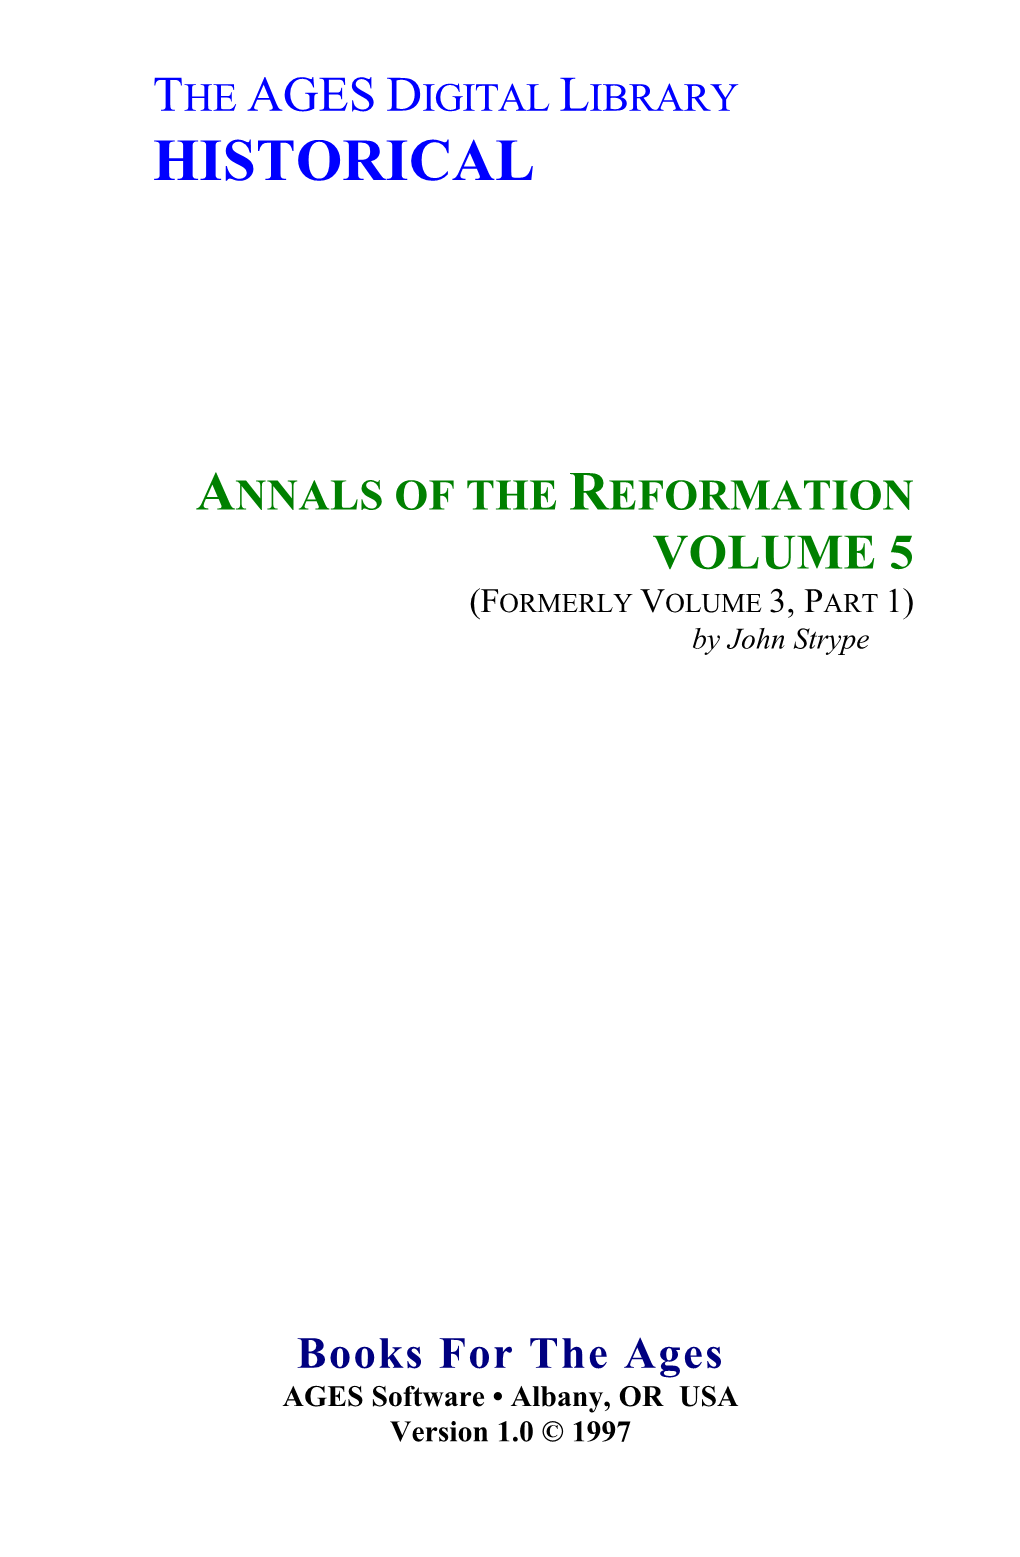 Annals of the Reformation Vol. 5